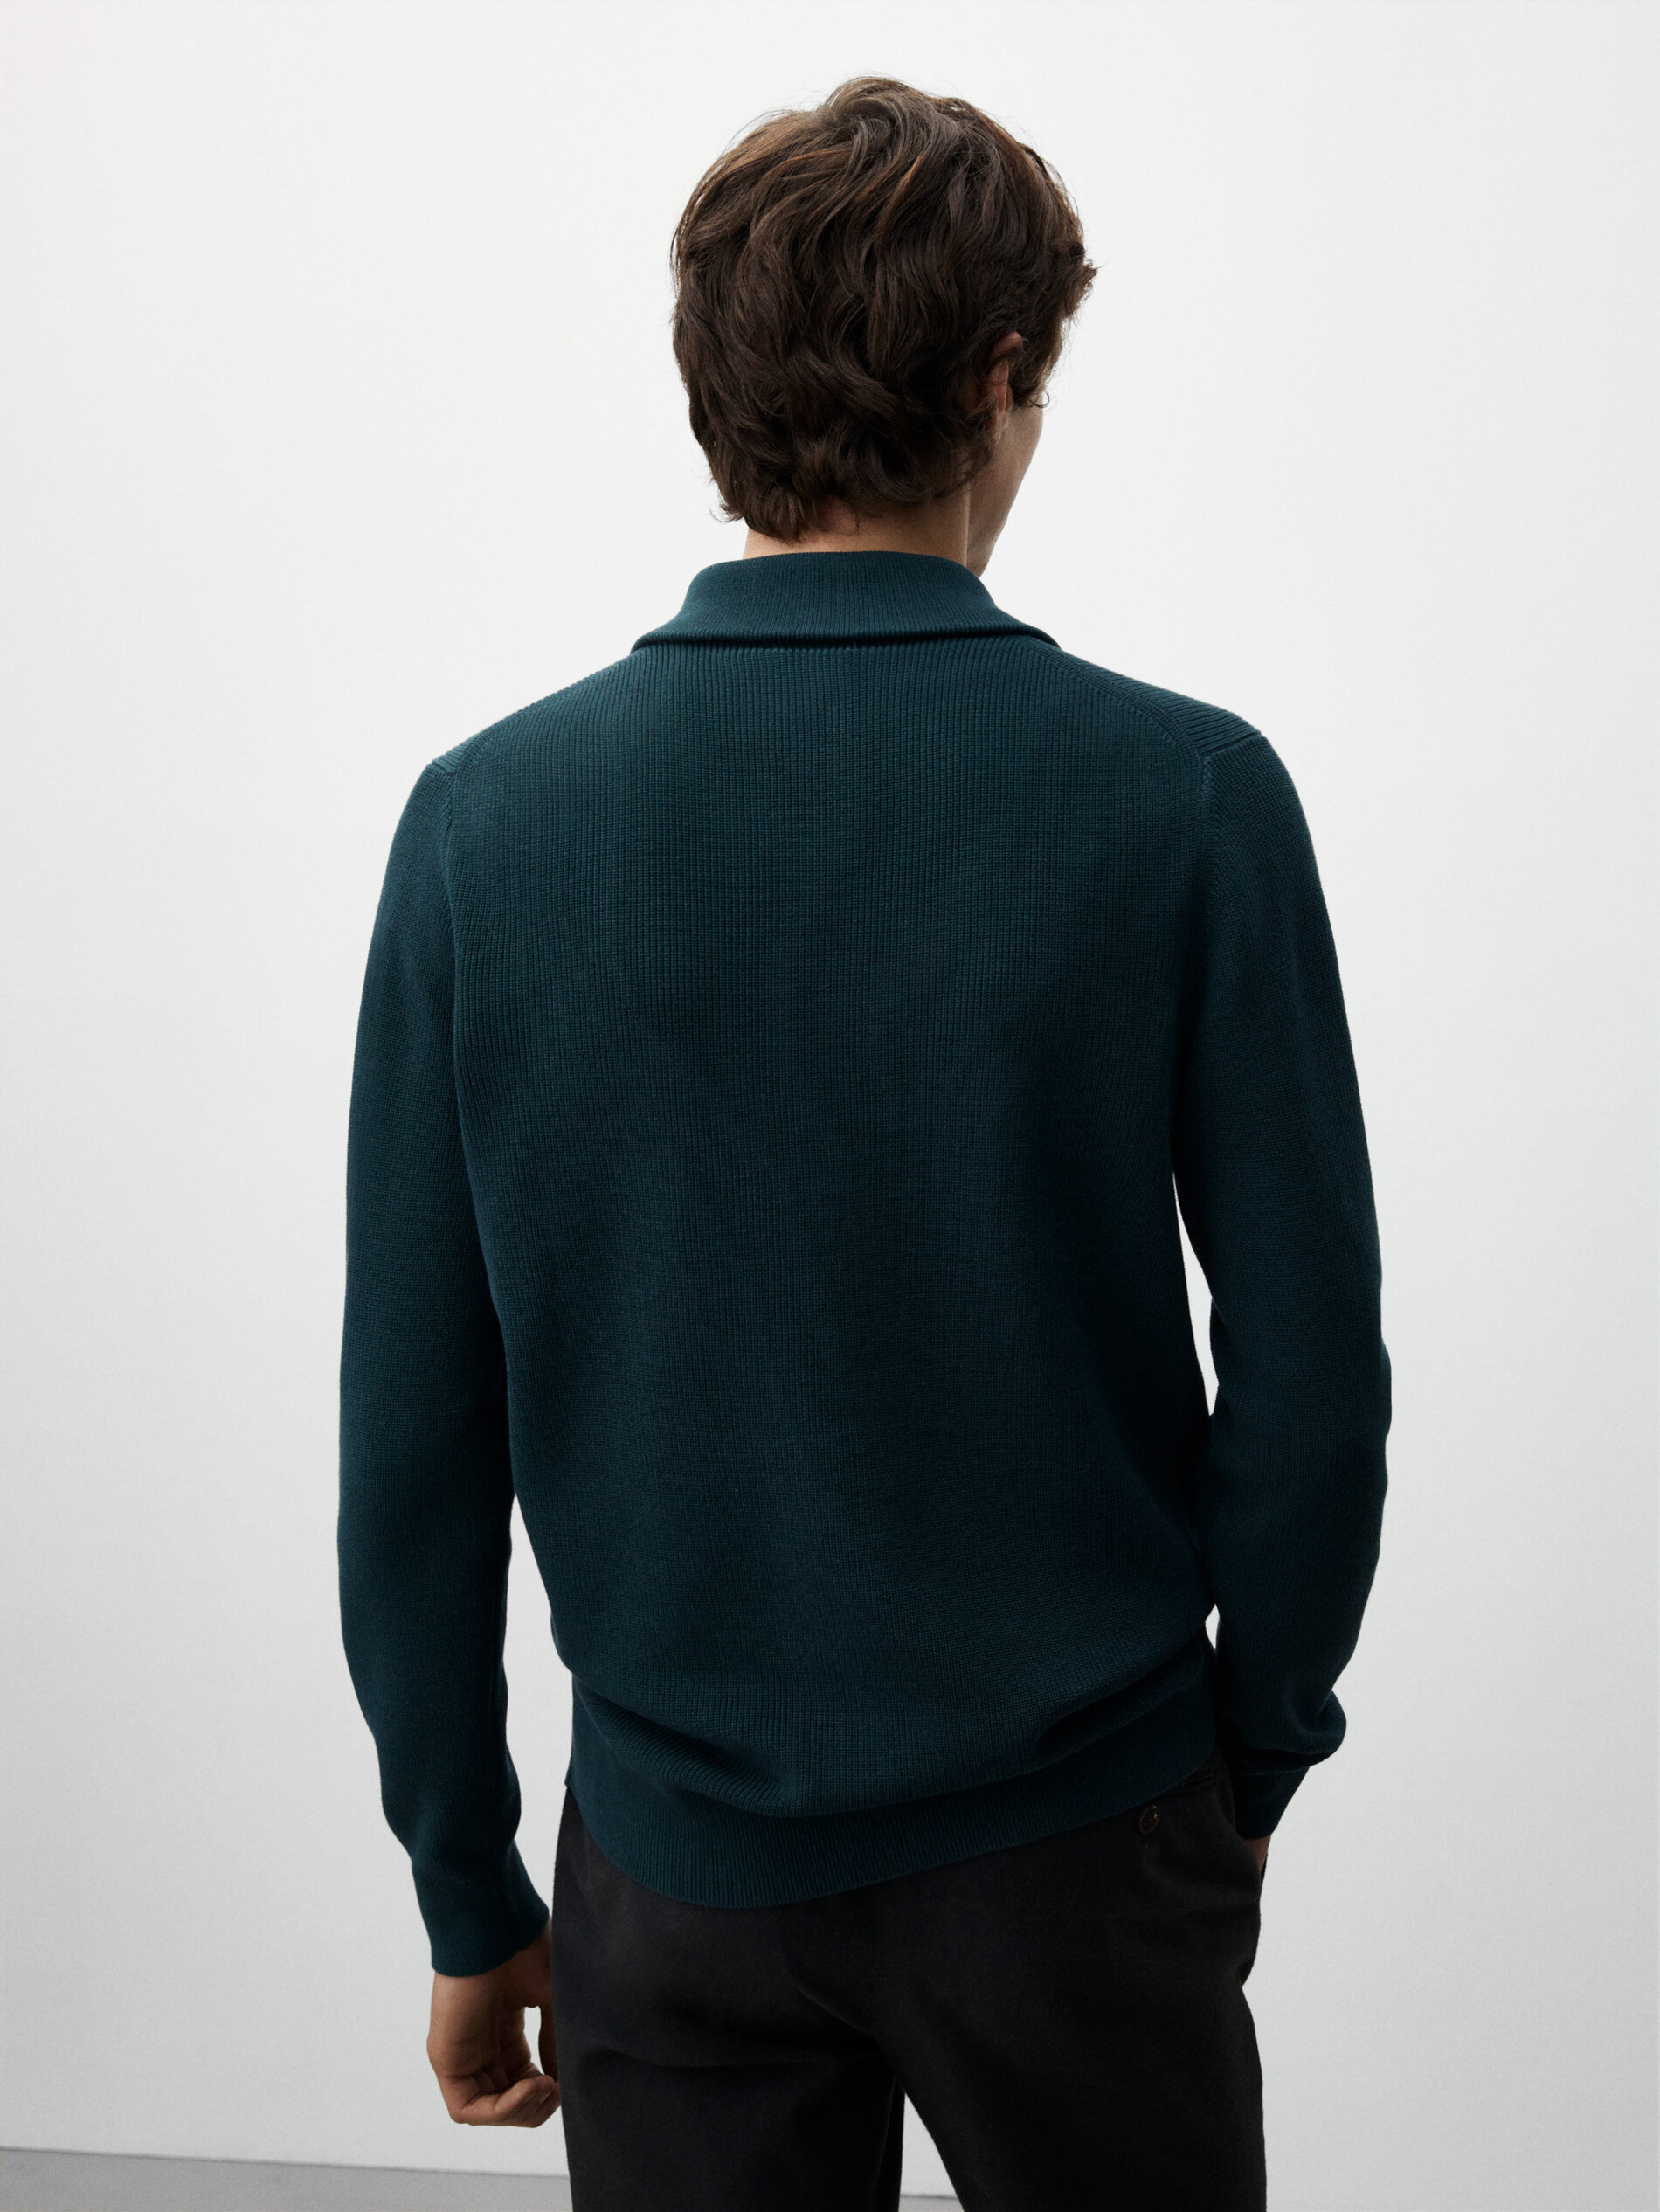 Massimo Dutti - Mock neck knit sweater with a zip